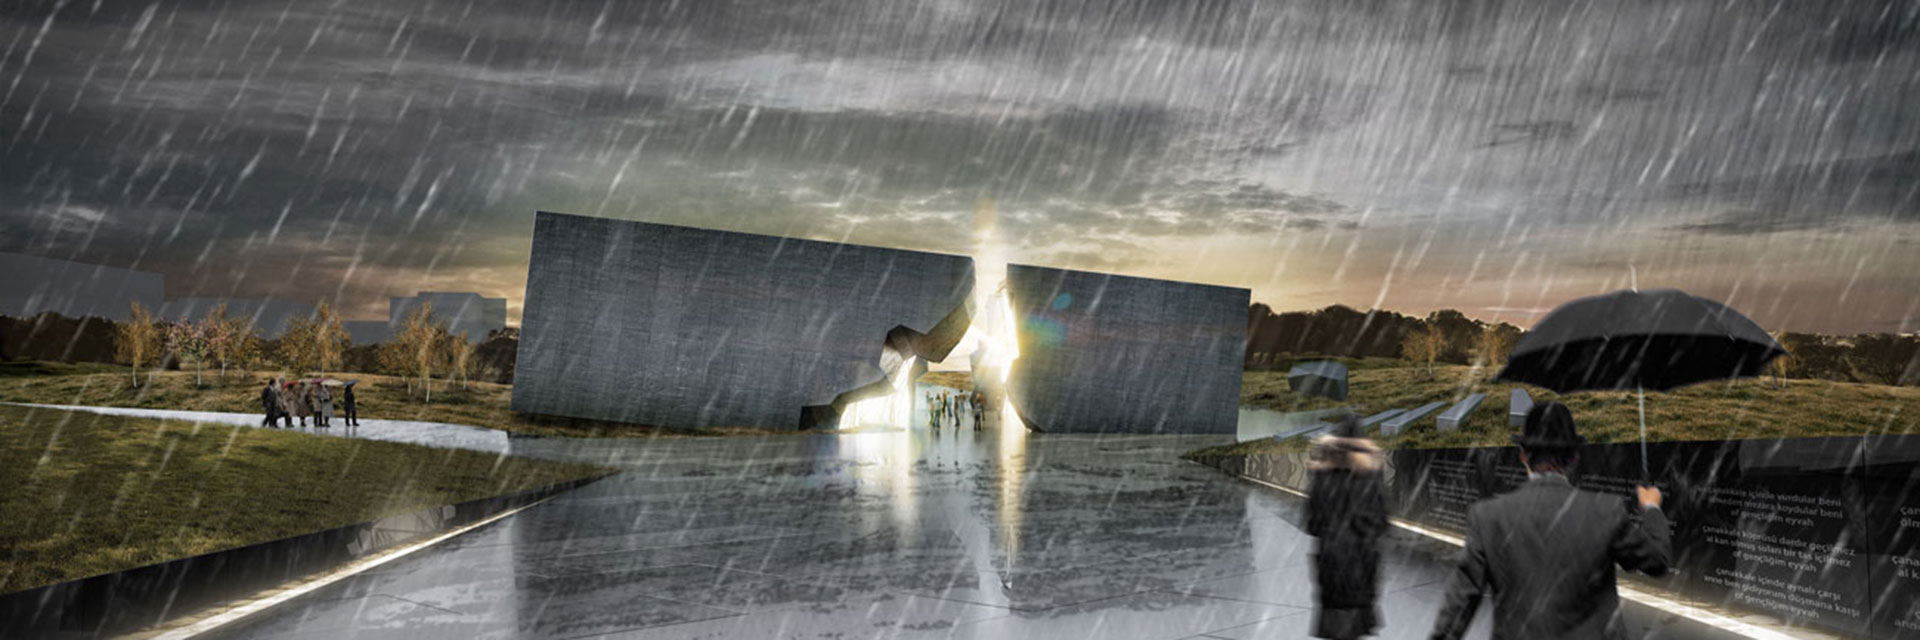 İpek Baycan Architects - Çanakkale War Research Center Competition Project – Mention Prize